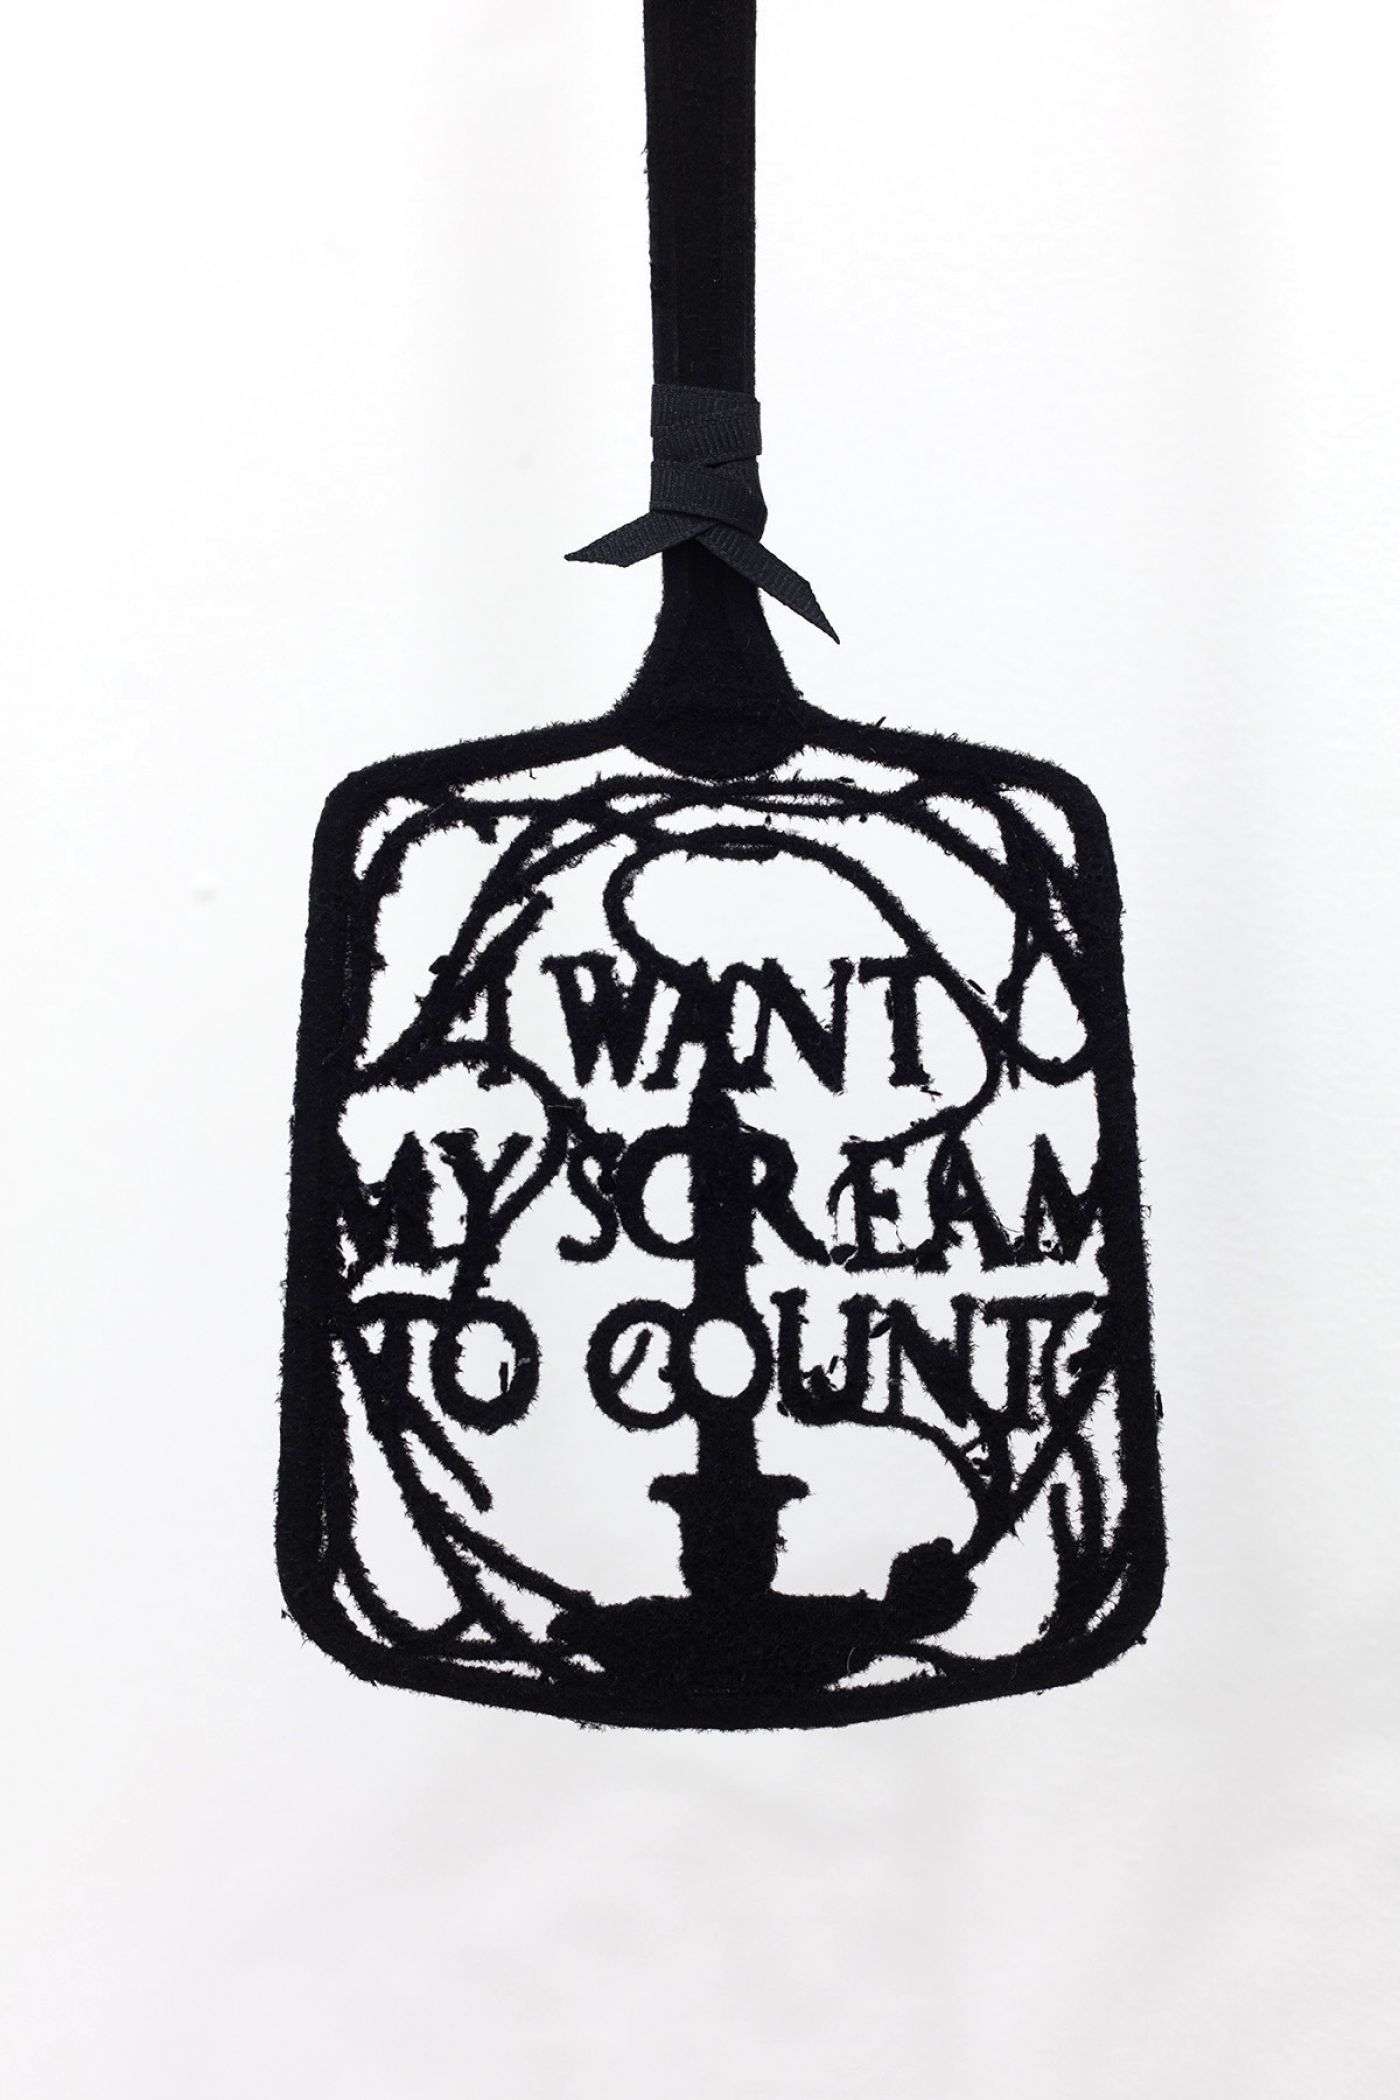 Sydney Shen, I Want My Scream to Count, 2017